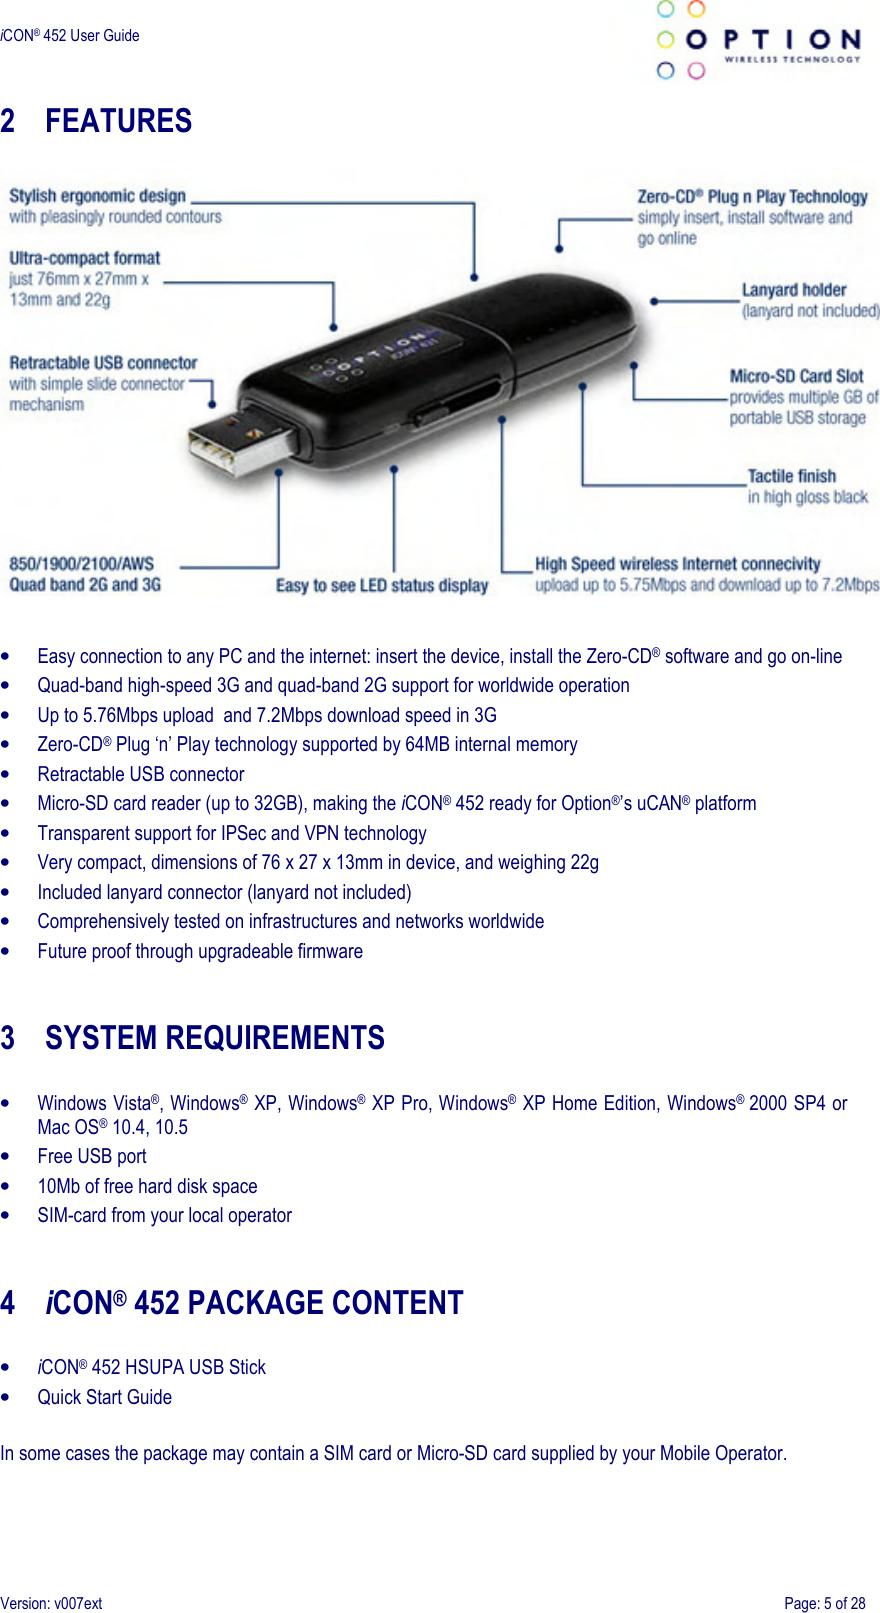  iCON® 452 User Guide     Version: v007ext  Page: 5 of 28 2 FEATURES    • Easy connection to any PC and the internet: insert the device, install the Zero-CD® software and go on-line • Quad-band high-speed 3G and quad-band 2G support for worldwide operation • Up to 5.76Mbps upload  and 7.2Mbps download speed in 3G • Zero-CD® Plug ‘n’ Play technology supported by 64MB internal memory • Retractable USB connector • Micro-SD card reader (up to 32GB), making the iCON® 452 ready for Option®’s uCAN® platform • Transparent support for IPSec and VPN technology • Very compact, dimensions of 76 x 27 x 13mm in device, and weighing 22g • Included lanyard connector (lanyard not included) • Comprehensively tested on infrastructures and networks worldwide • Future proof through upgradeable firmware   3 SYSTEM REQUIREMENTS  • Windows Vista®, Windows® XP, Windows® XP Pro, Windows® XP Home Edition, Windows®  2000 SP4 or Mac OS® 10.4, 10.5 • Free USB port • 10Mb of free hard disk space • SIM-card from your local operator   4 iCON® 452 PACKAGE CONTENT  • iCON® 452 HSUPA USB Stick • Quick Start Guide  In some cases the package may contain a SIM card or Micro-SD card supplied by your Mobile Operator. 